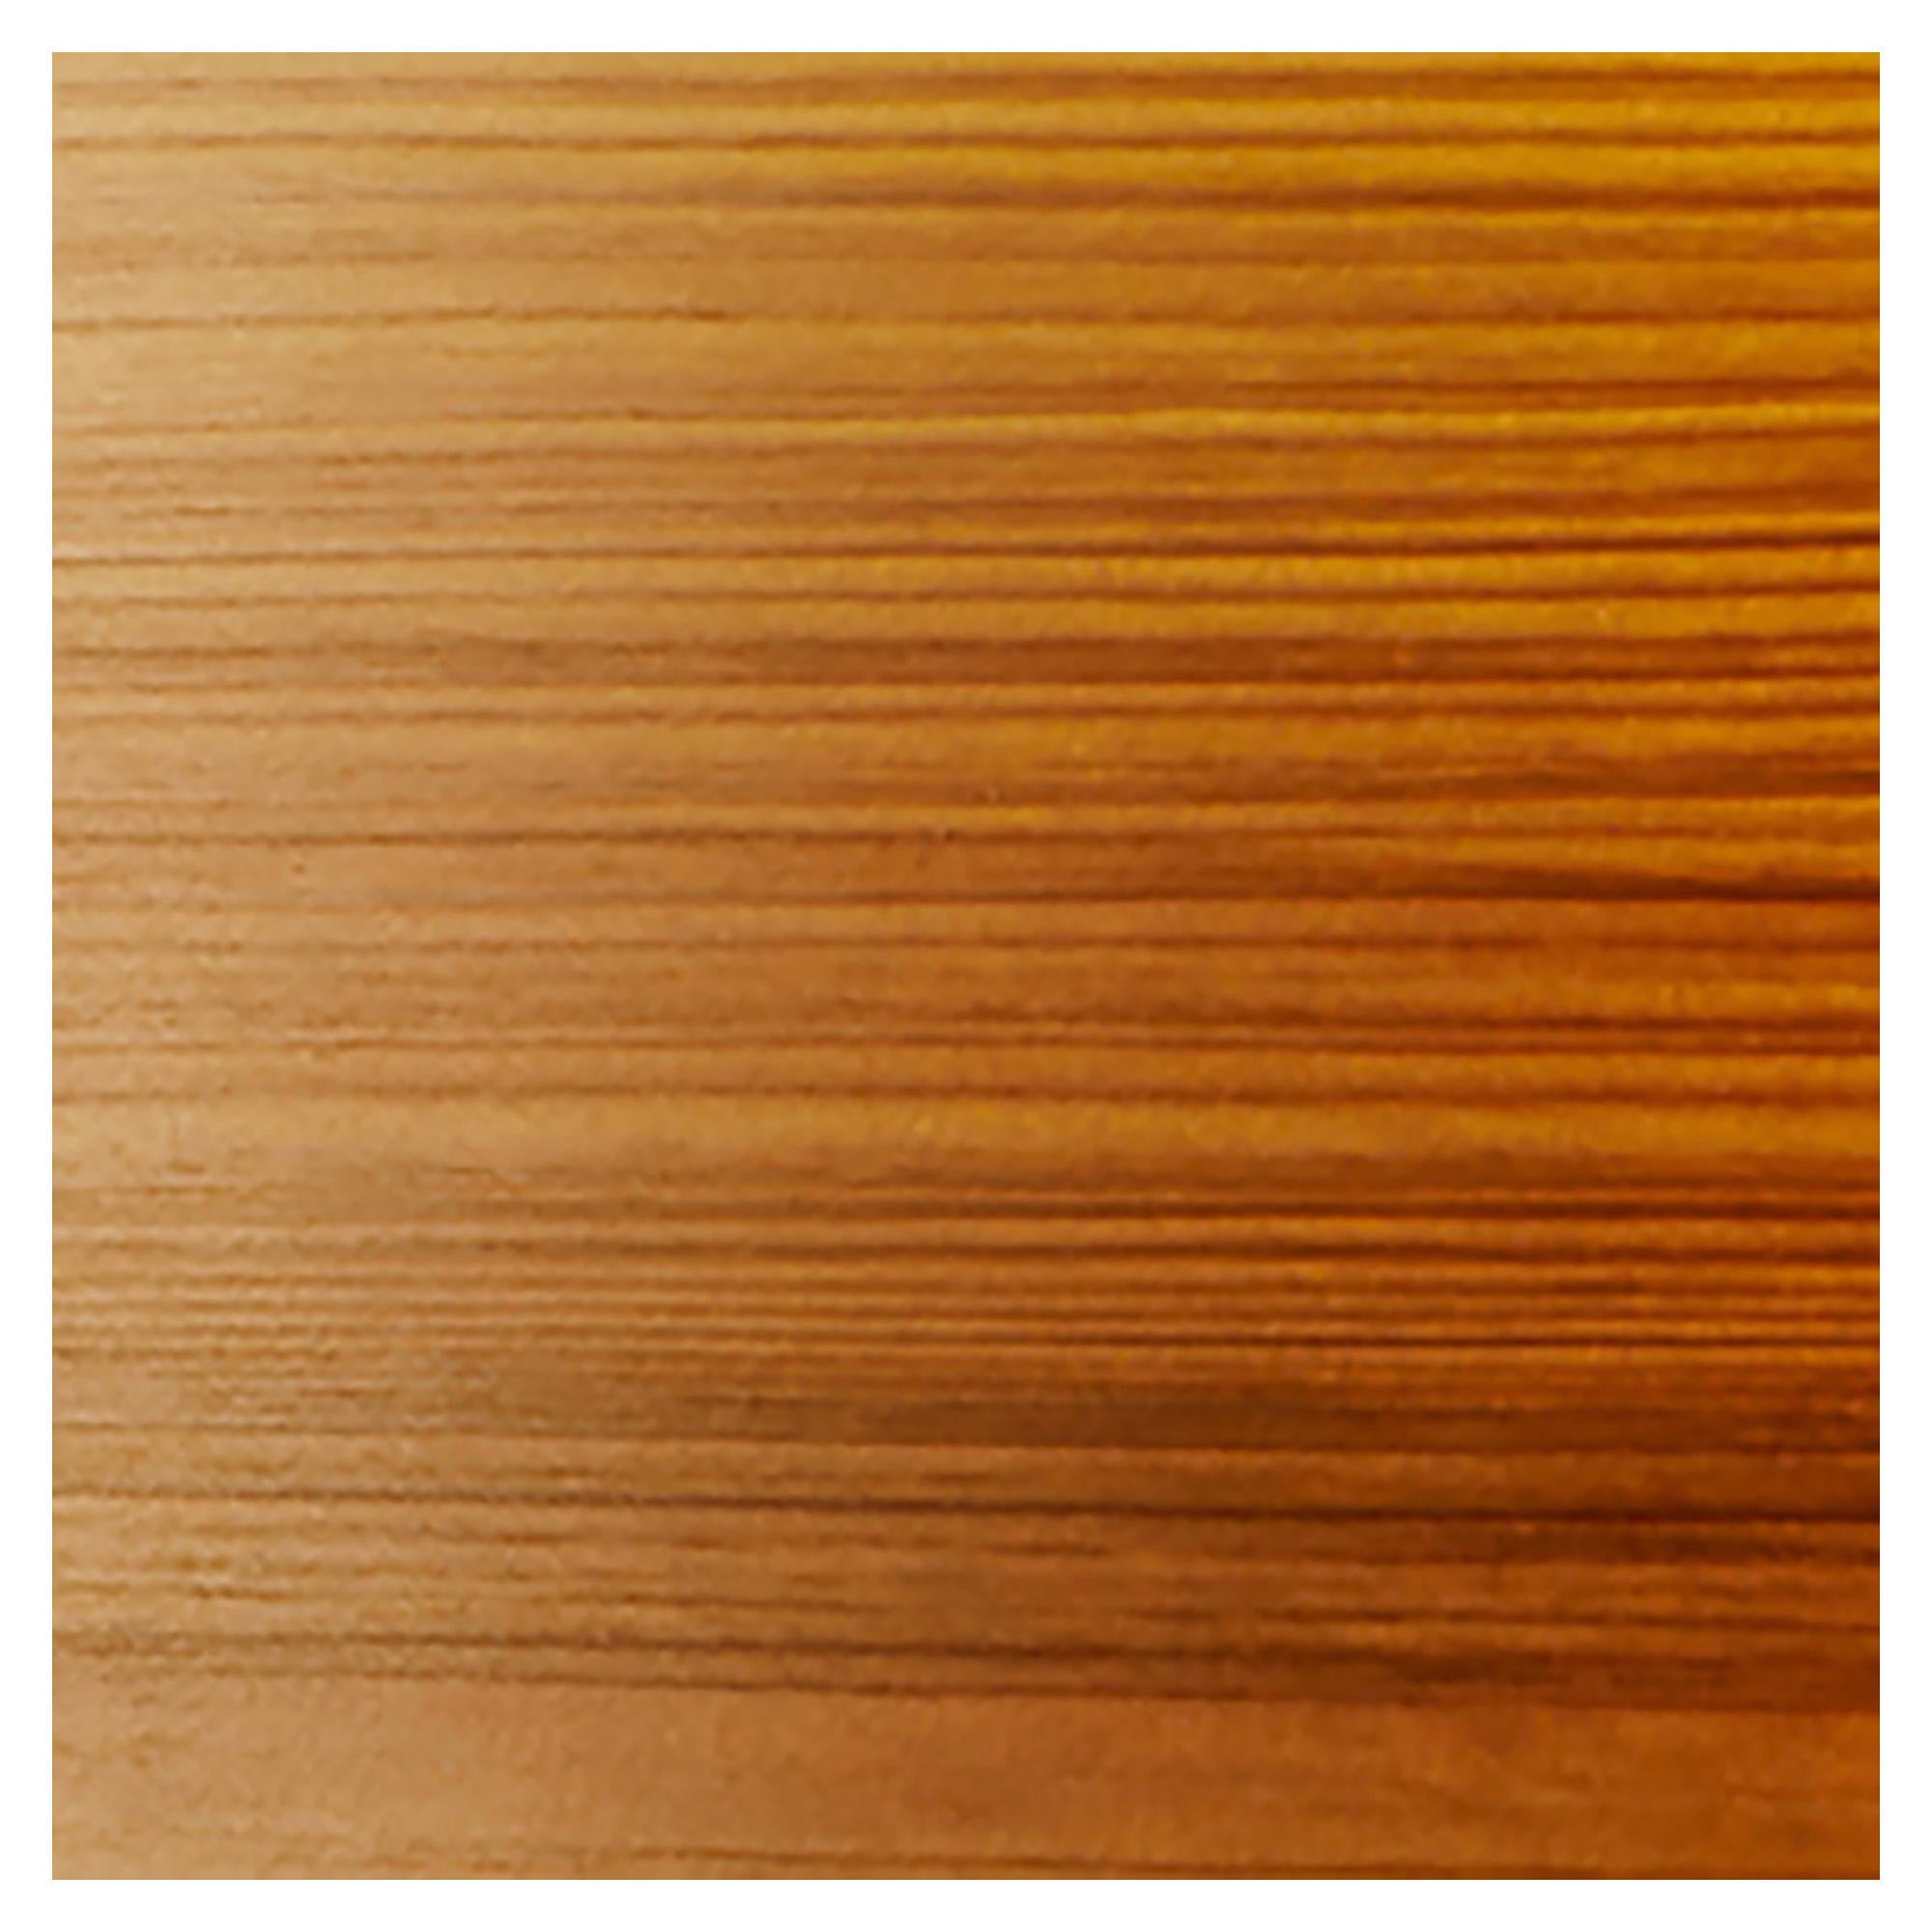 We provide a full set of veneer samples for you reference.